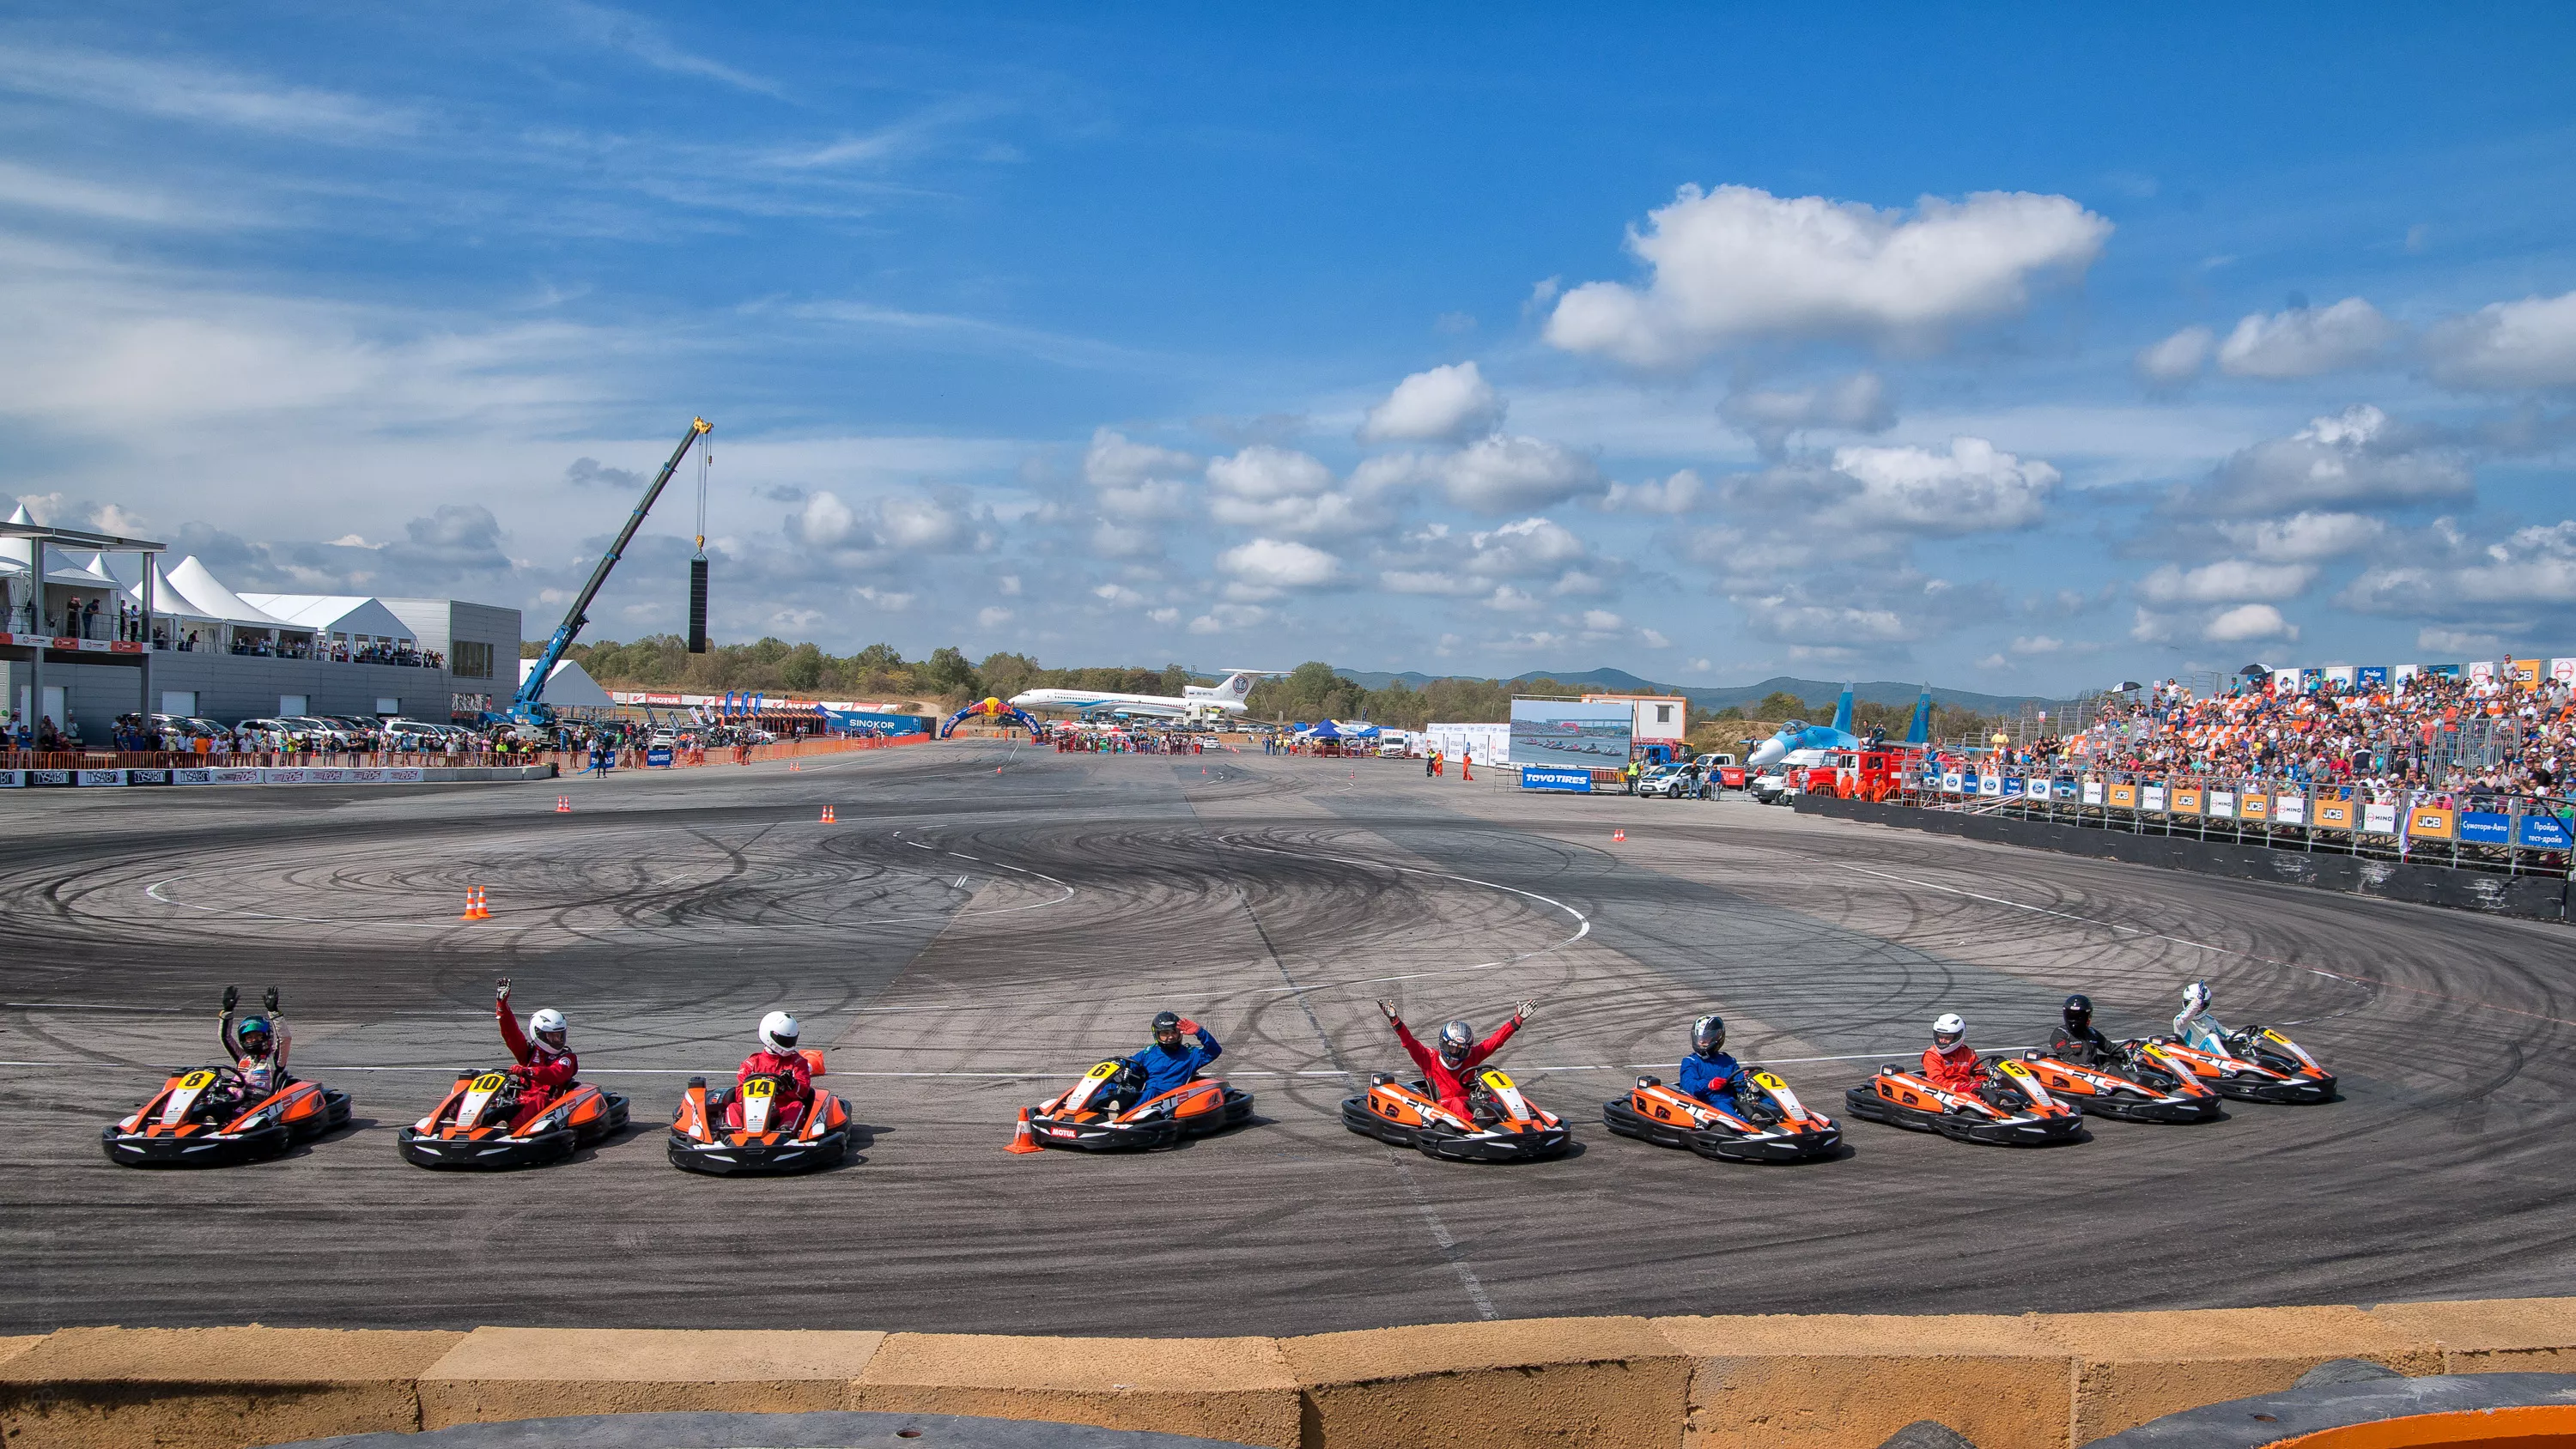 Niagara Speedway Go Karts in Canada, North America | Karting - Rated 6.6